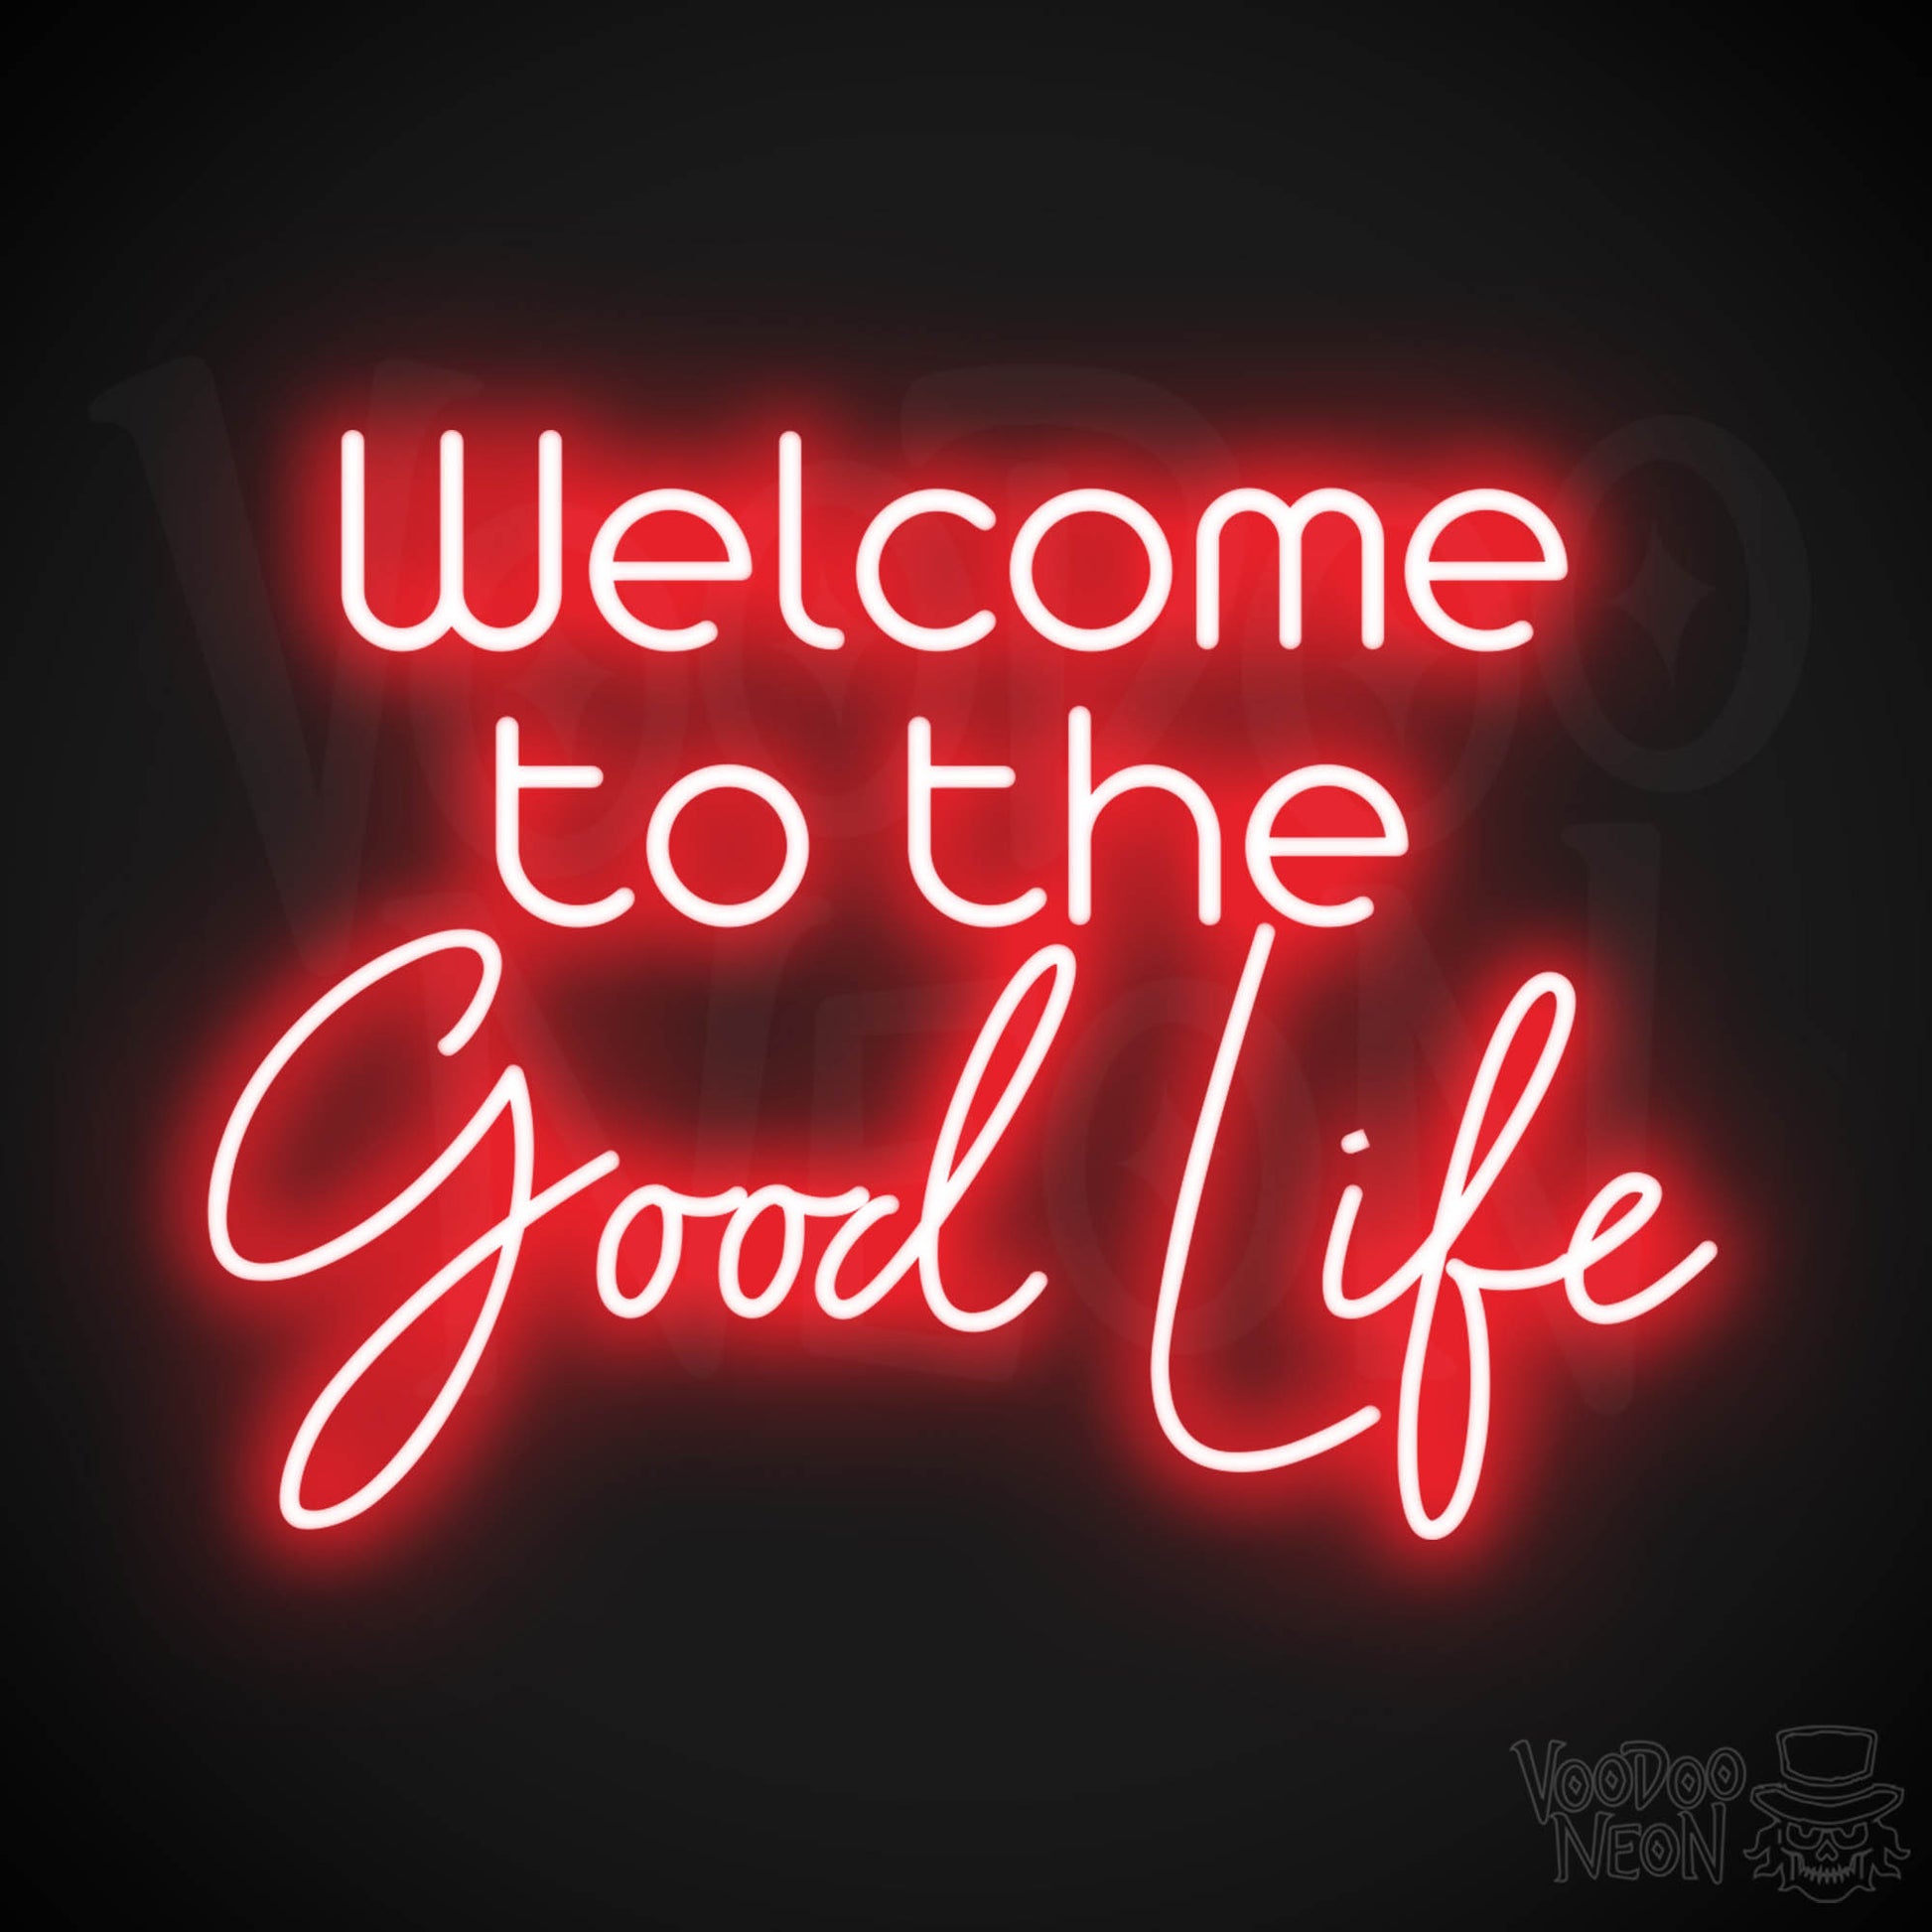 Welcome To The Good Life LED Neon - Red